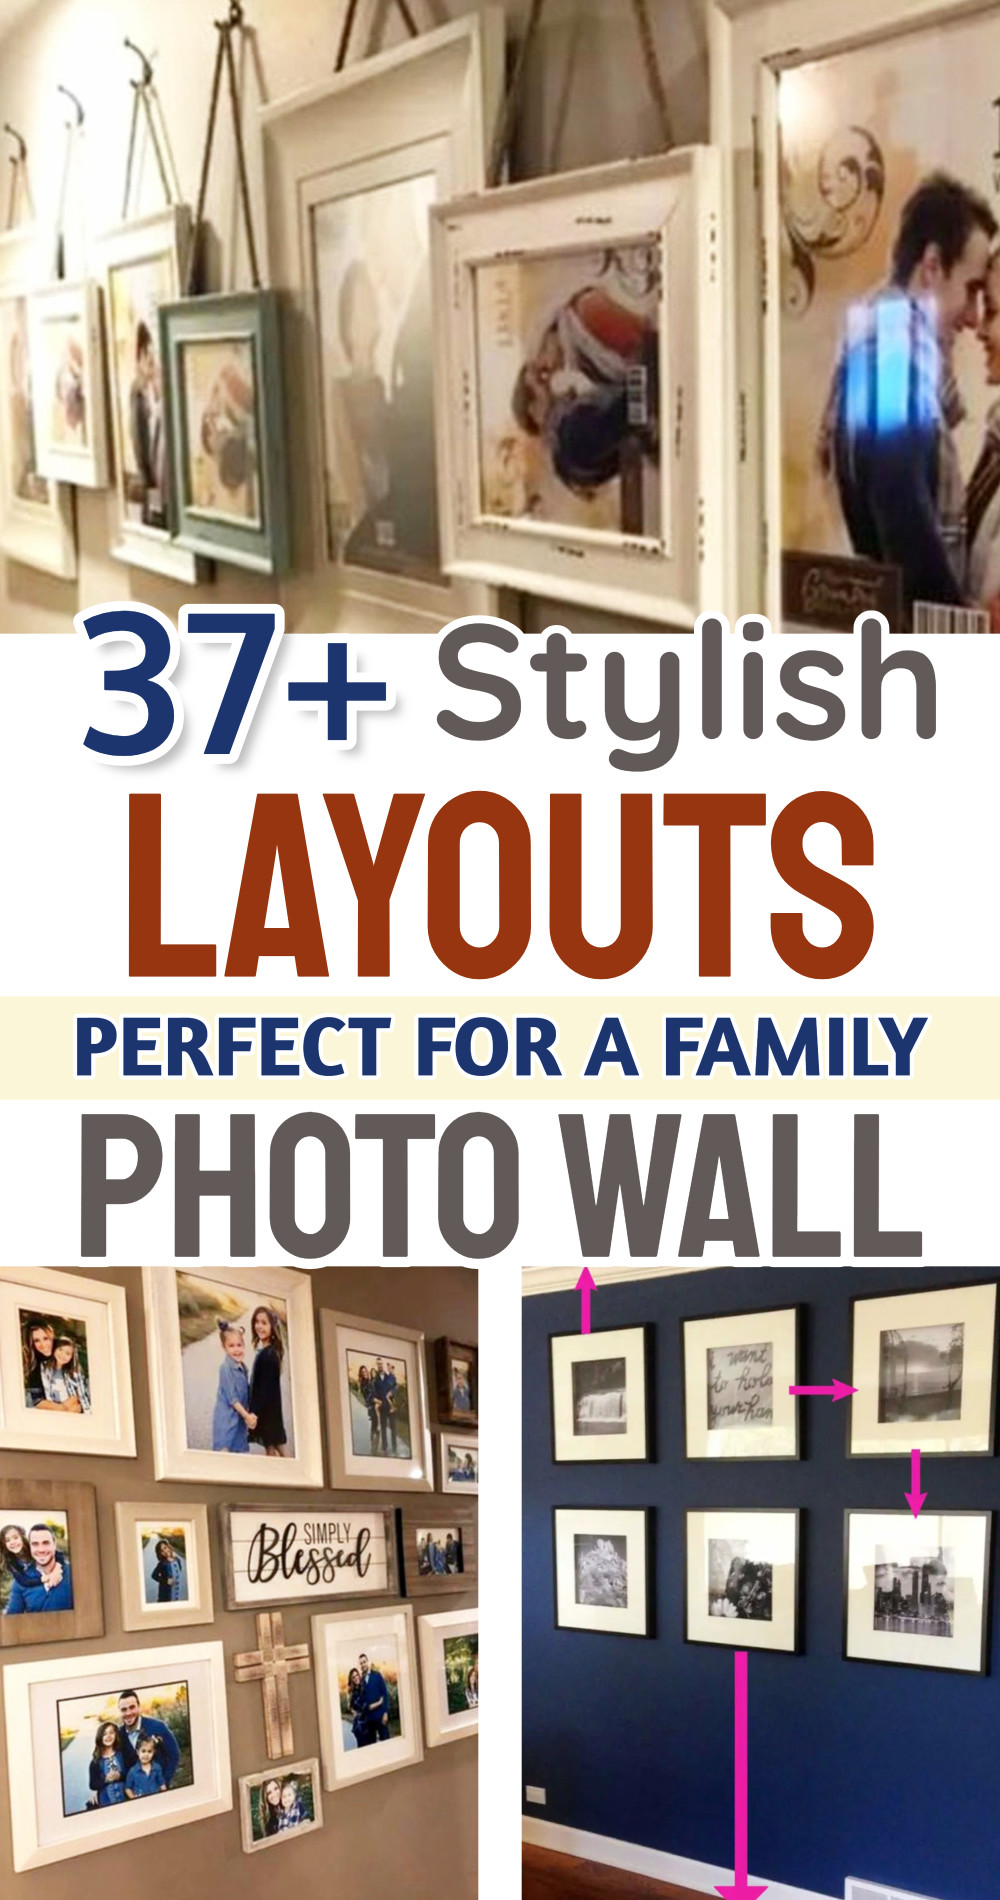 Stylish layouts perfect for a family photo wall